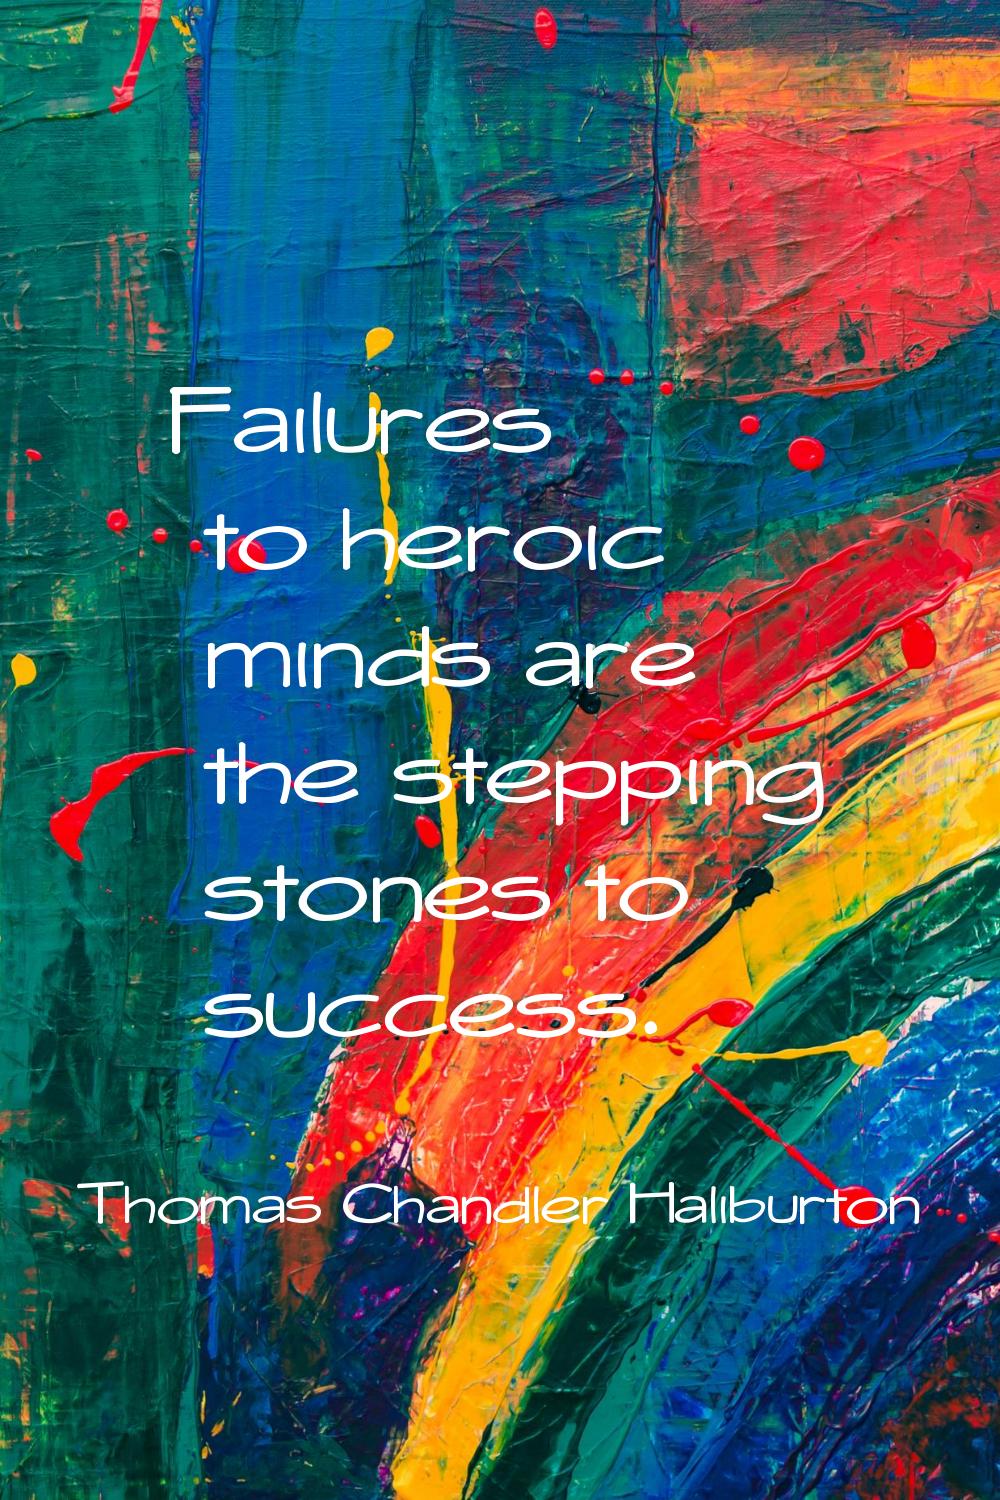 Failures to heroic minds are the stepping stones to success.